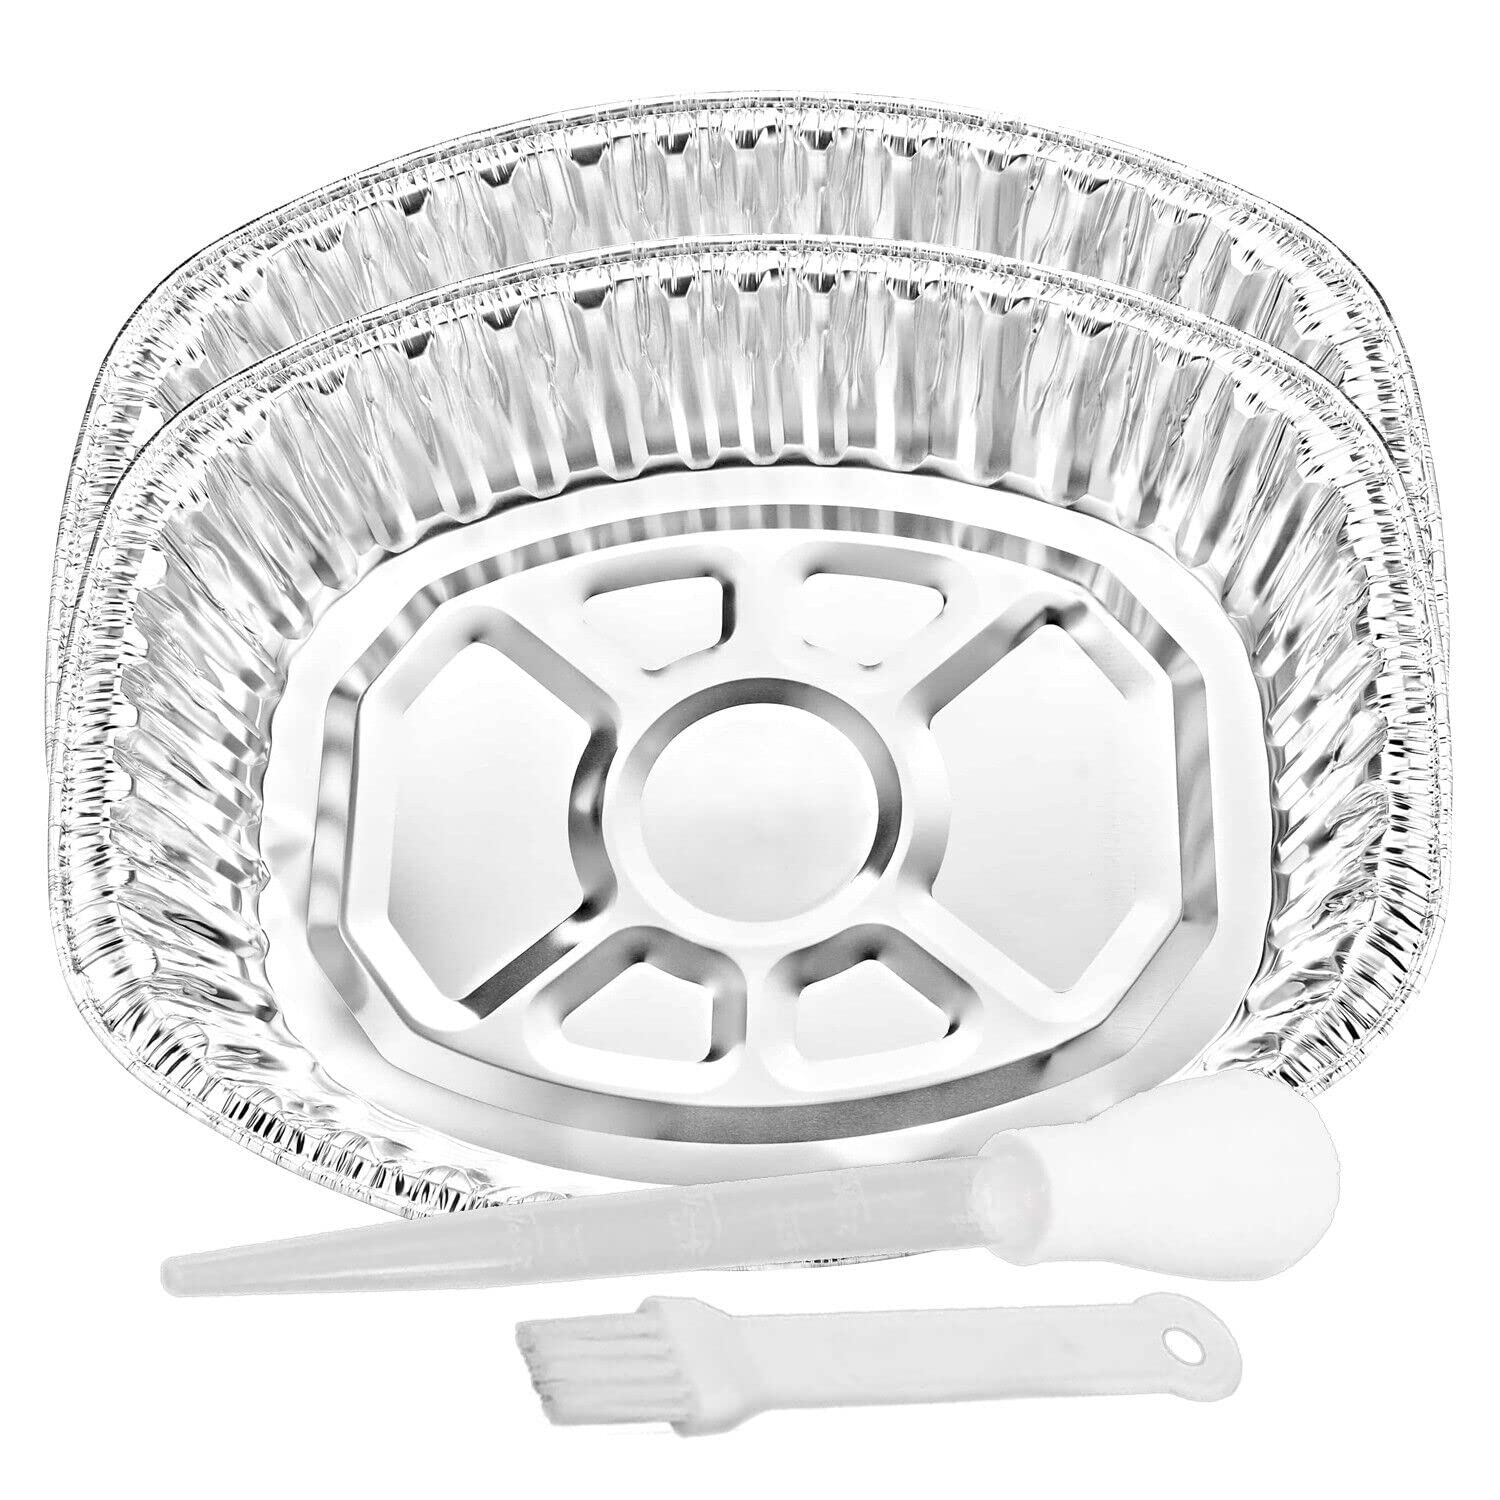 Nicole Fantini Extra Large Heavyduty Disposable Durable Turkey Roaster Aluminum Pans, Oval Shape for Chicken, Meat, Brisket, Roasting, Baking, Recyclable ALONG WITH ONE FREE 3PCS BASTING SET: 2 Pans